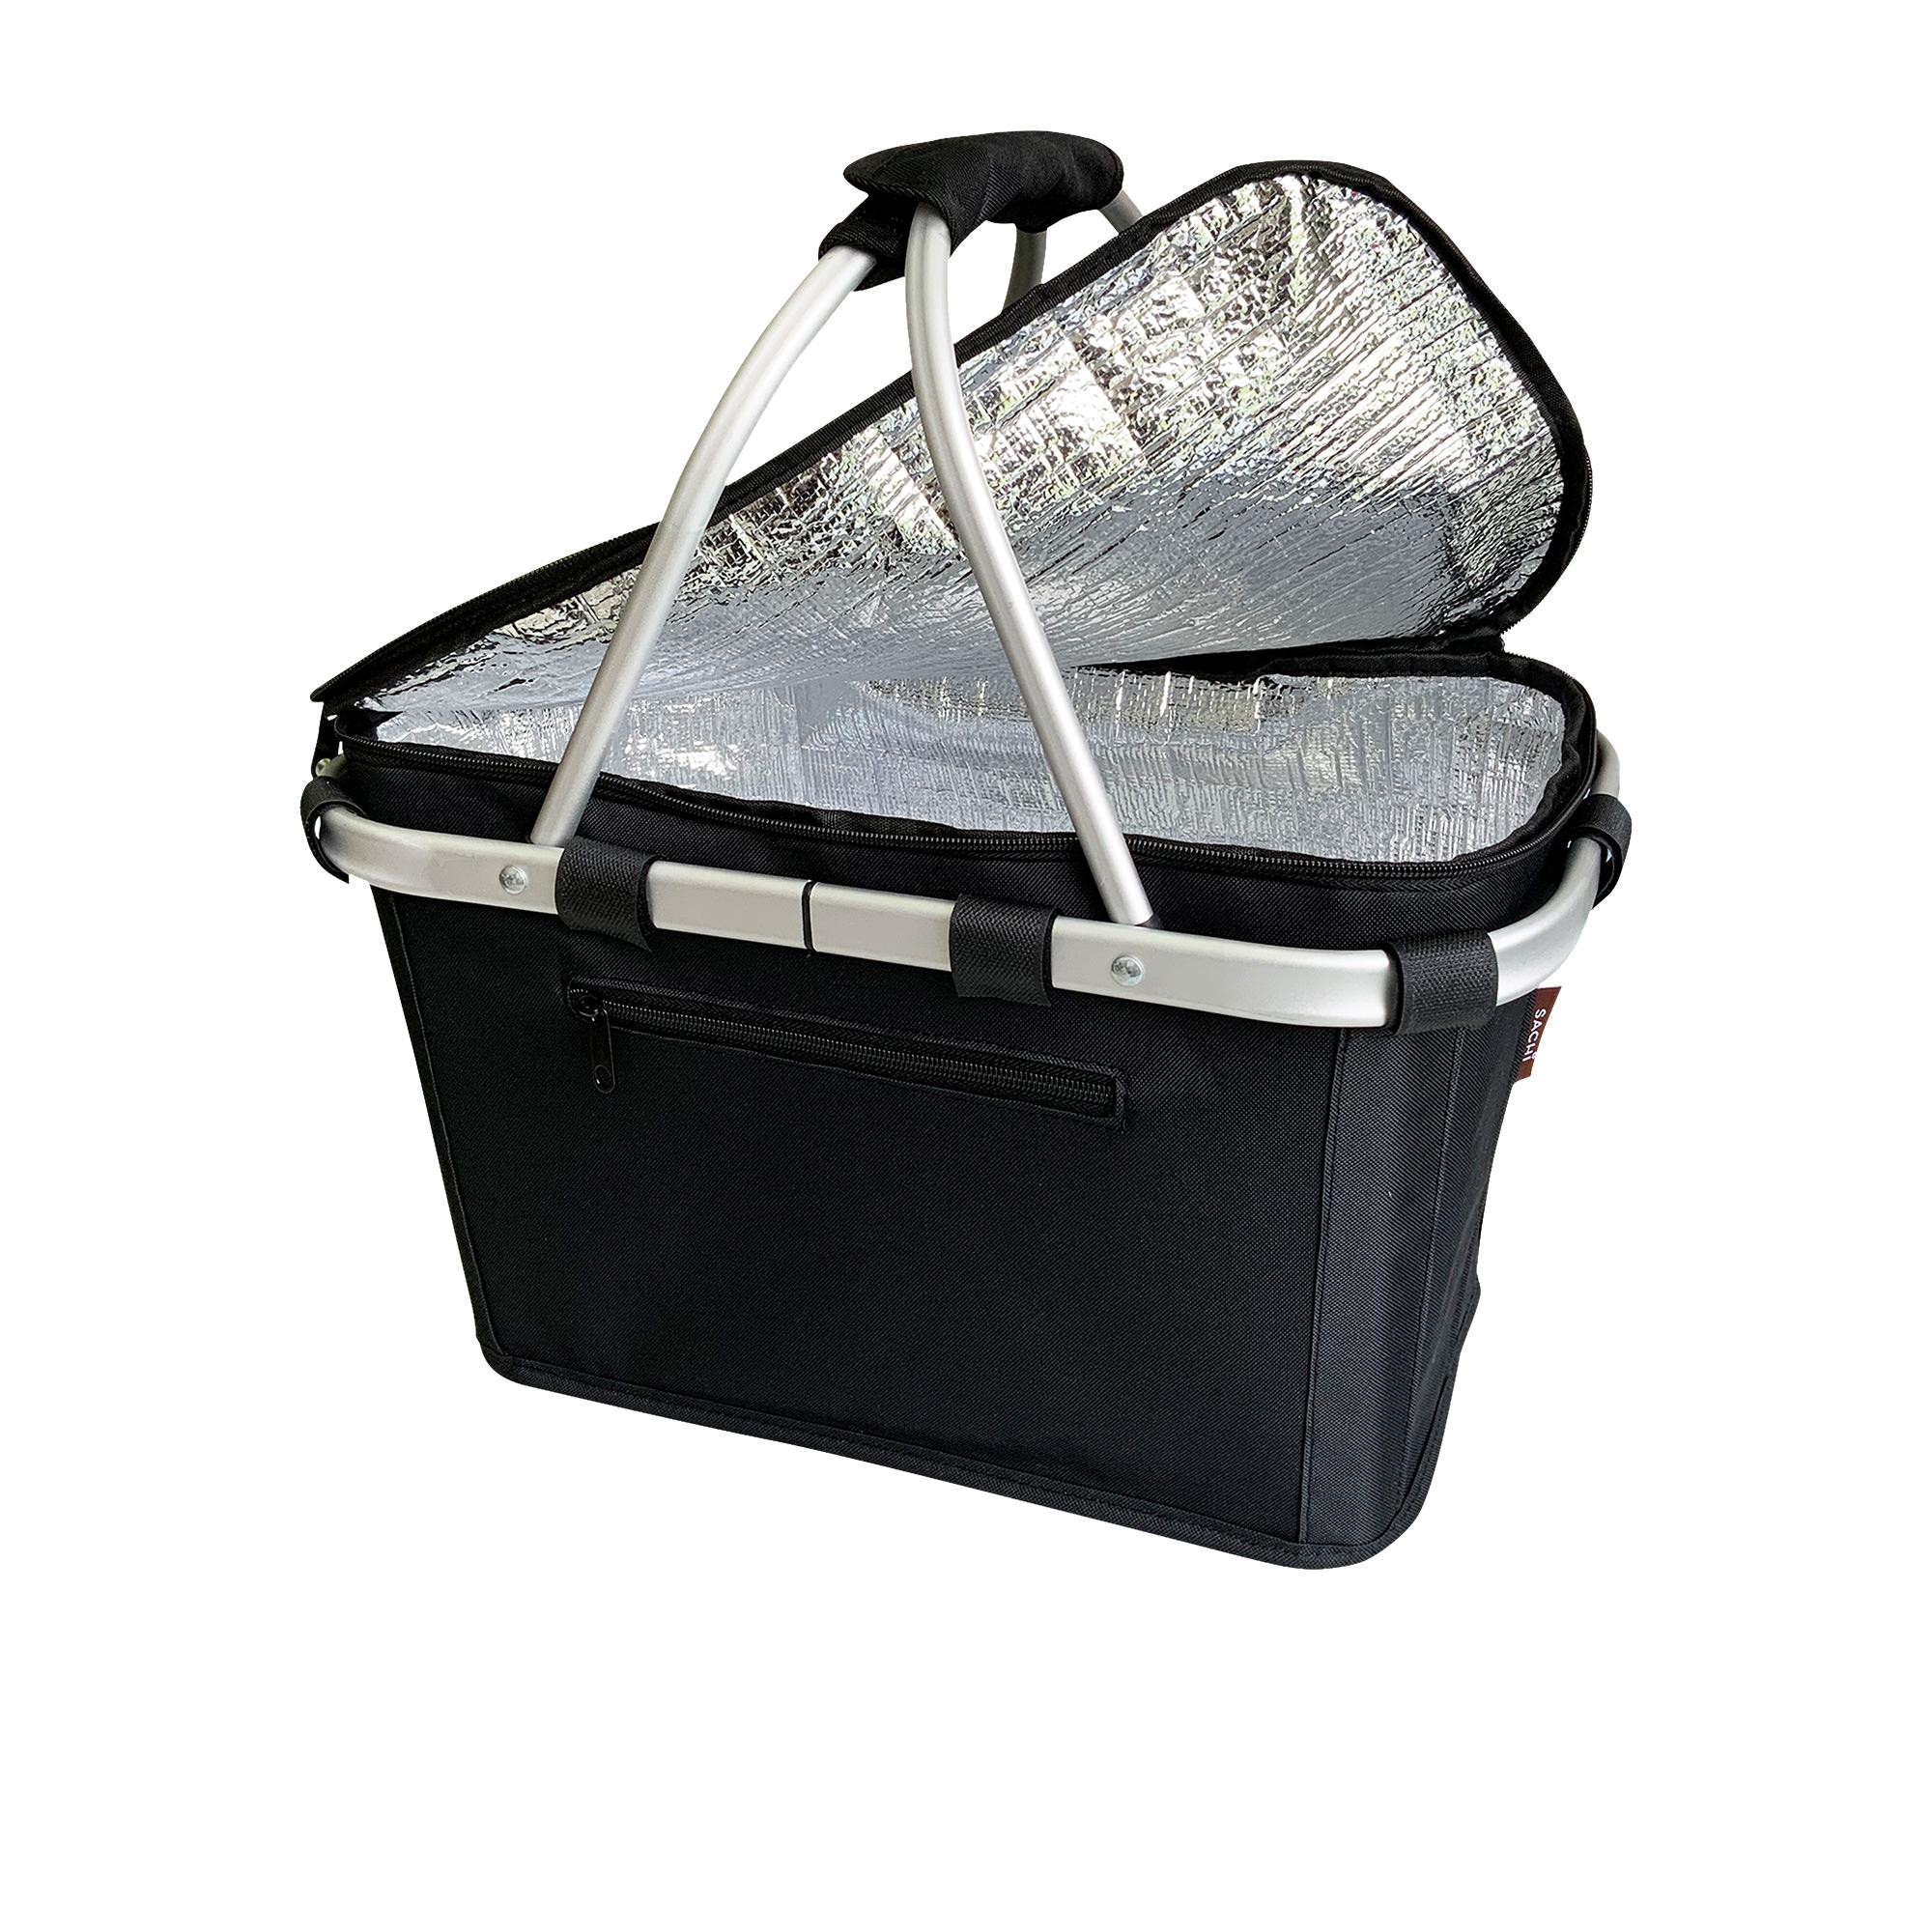 Sachi Insulated Carry Basket with Lid Black Image 4